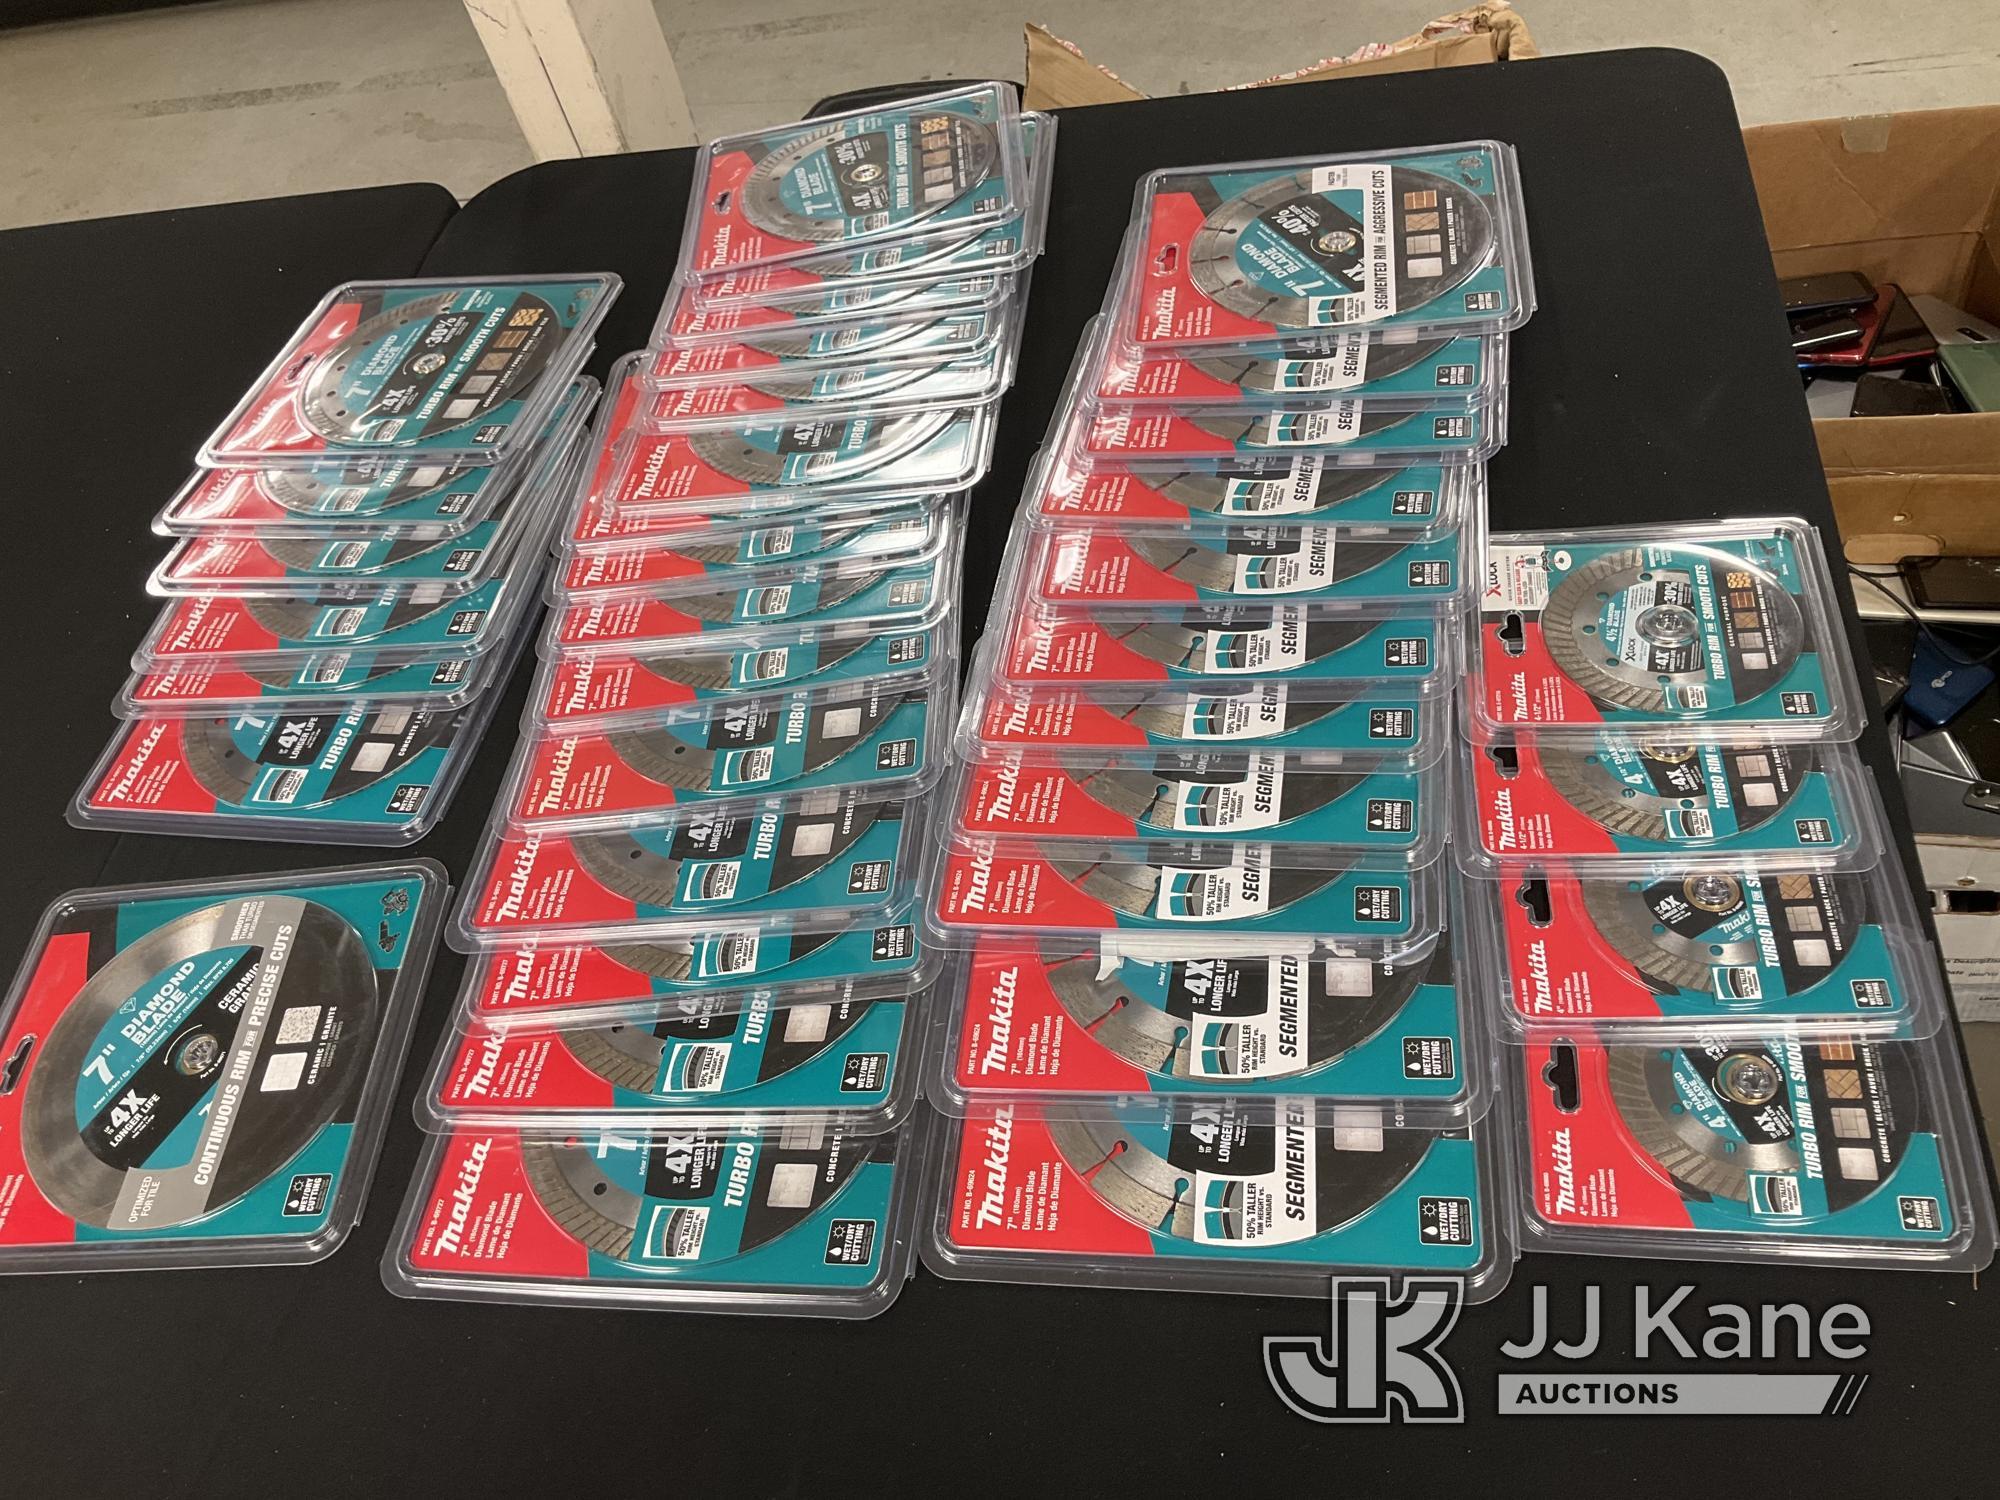 (Jurupa Valley, CA) Makita Saw Blades (Used) NOTE: This unit is being sold AS IS/WHERE IS via Timed